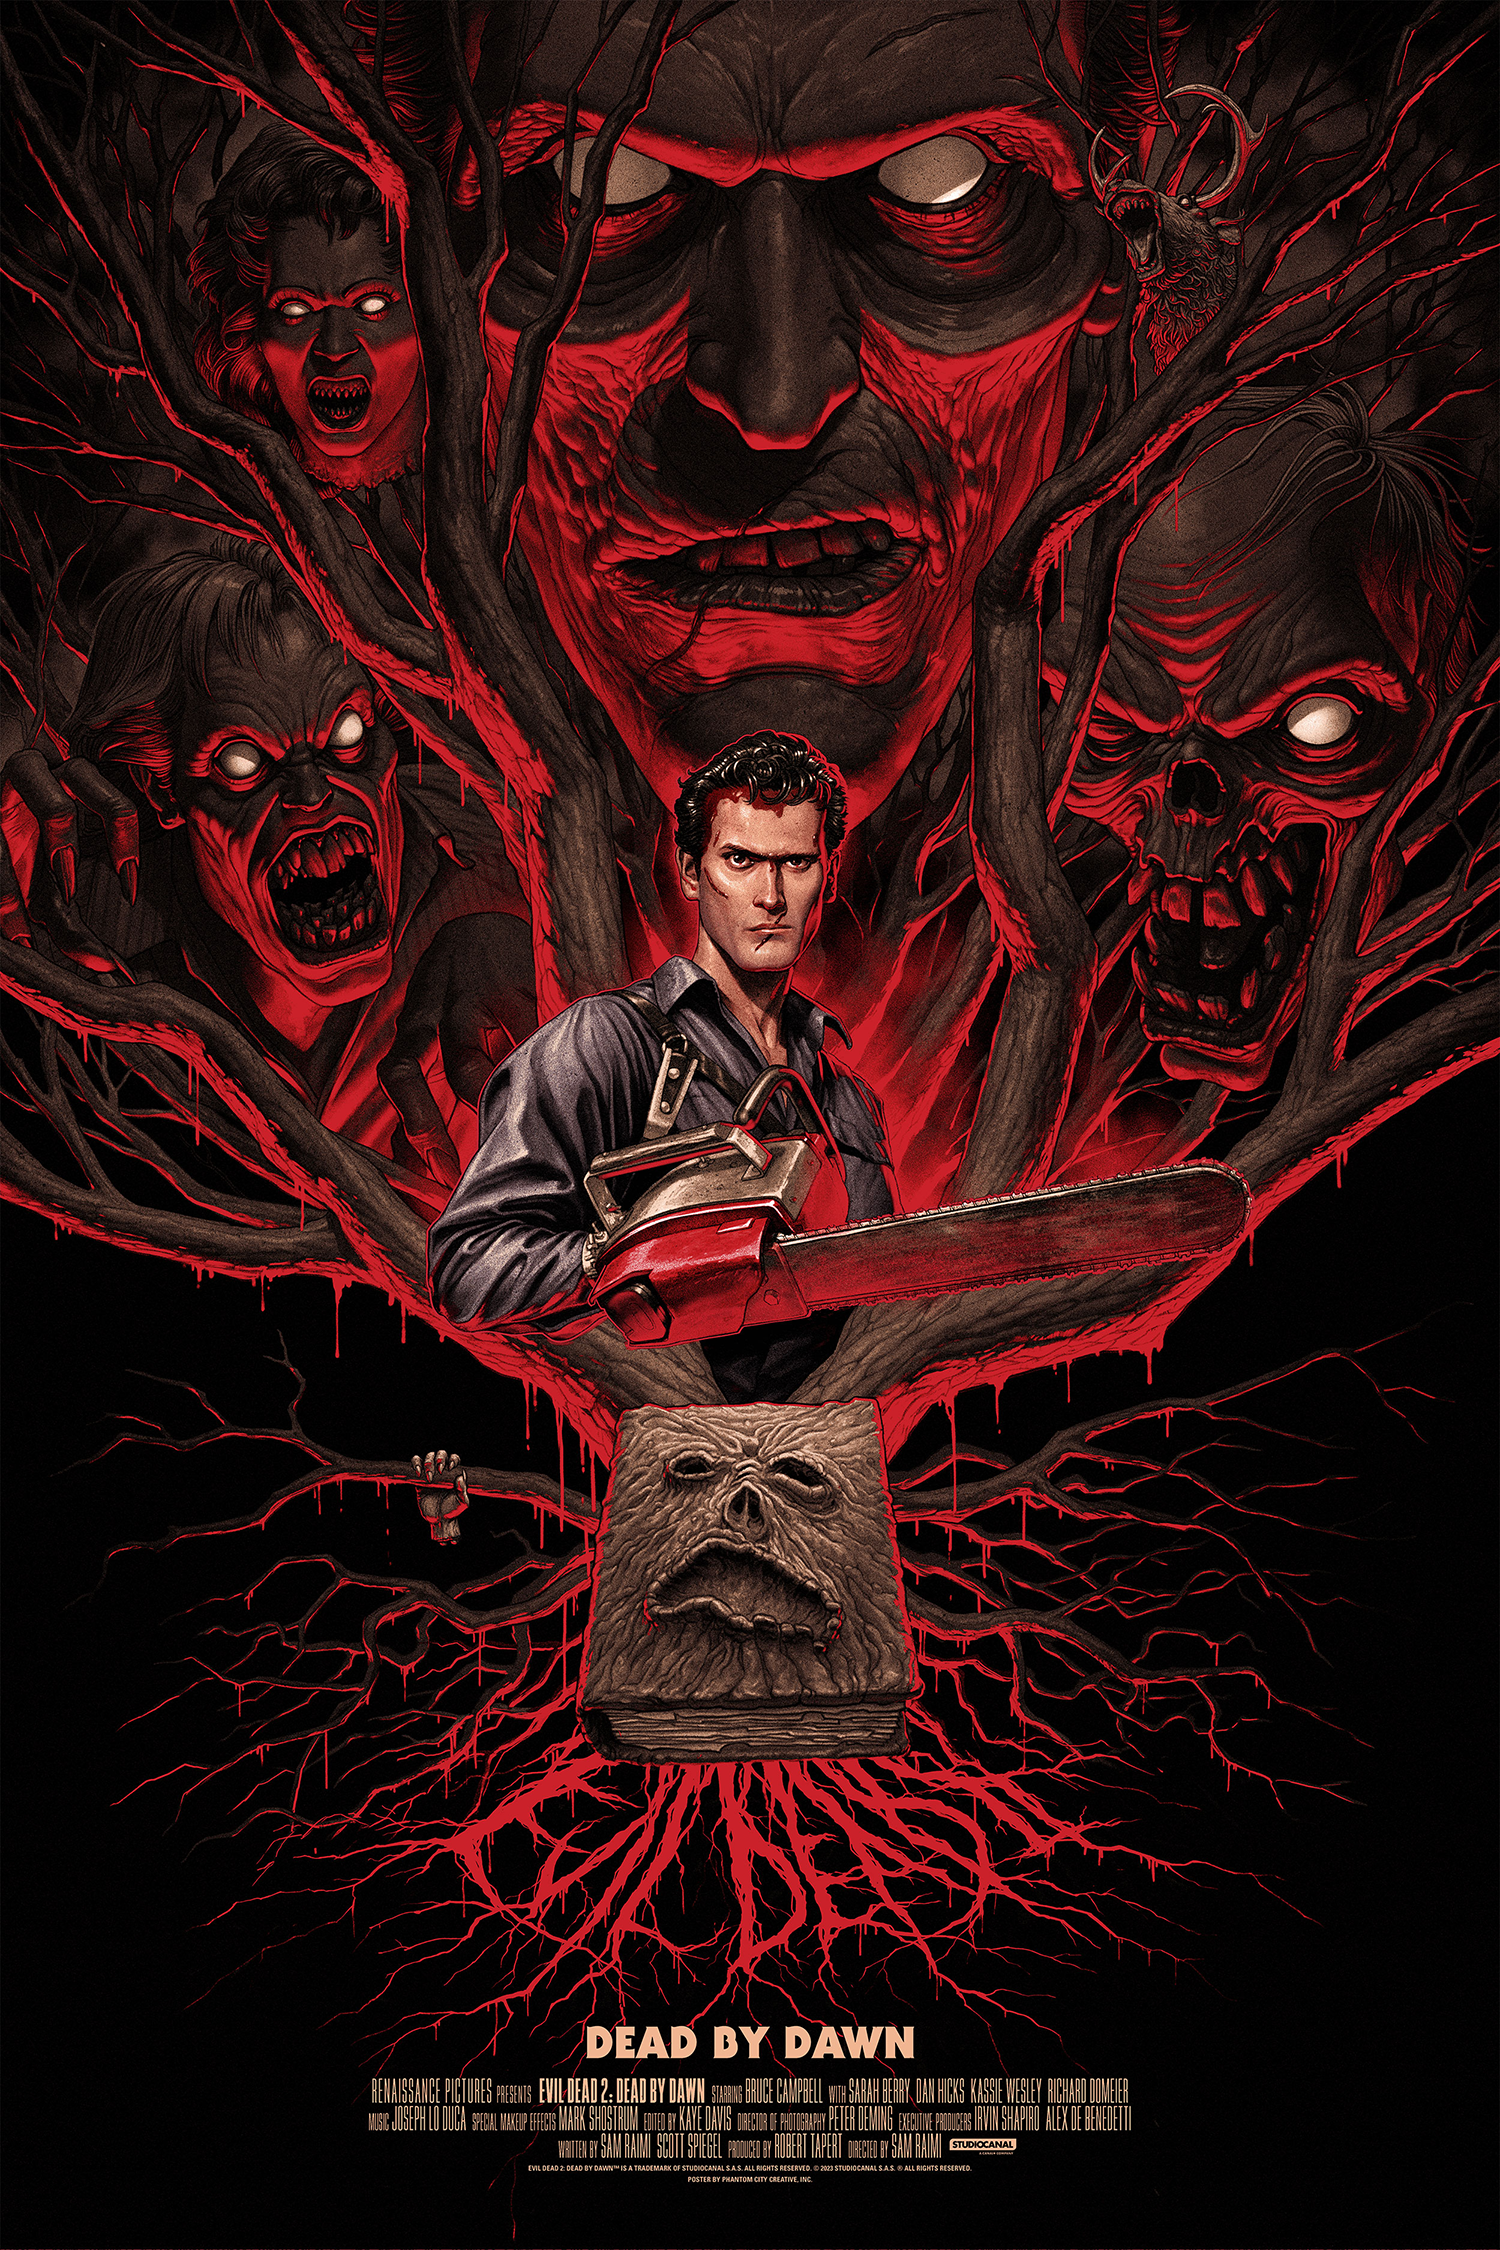 Evil Dead 2, Events